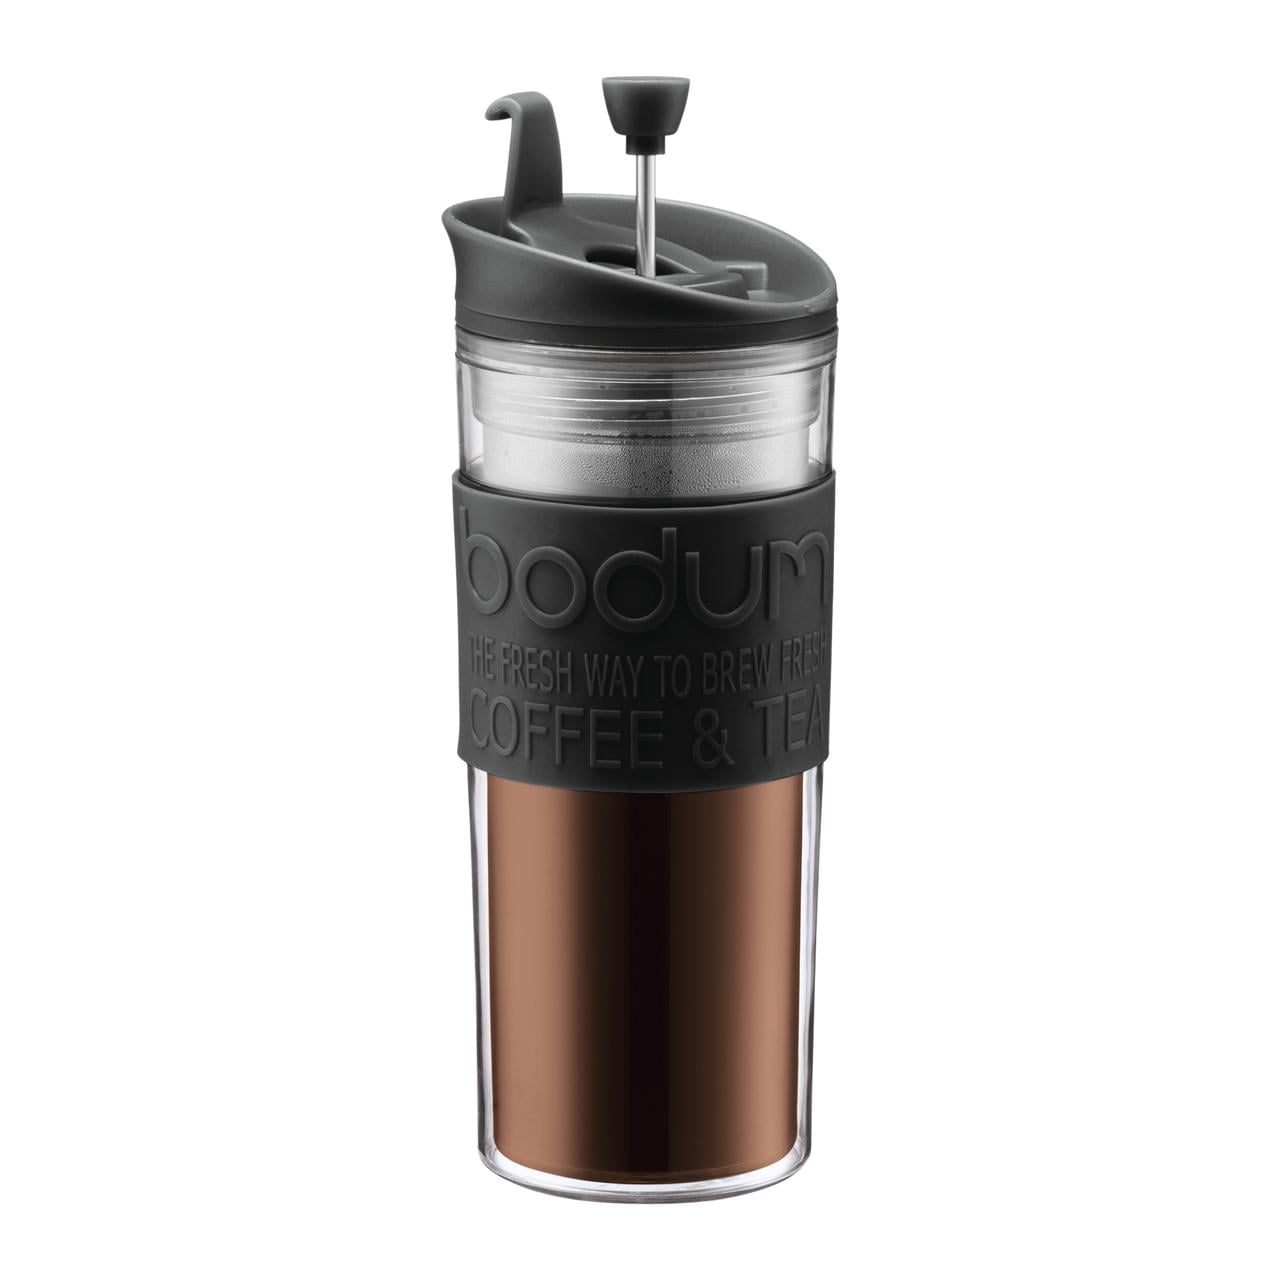 Bodum French Press Coffee Maker #157 Stainless Steel / Black 4 Cup 32 oz